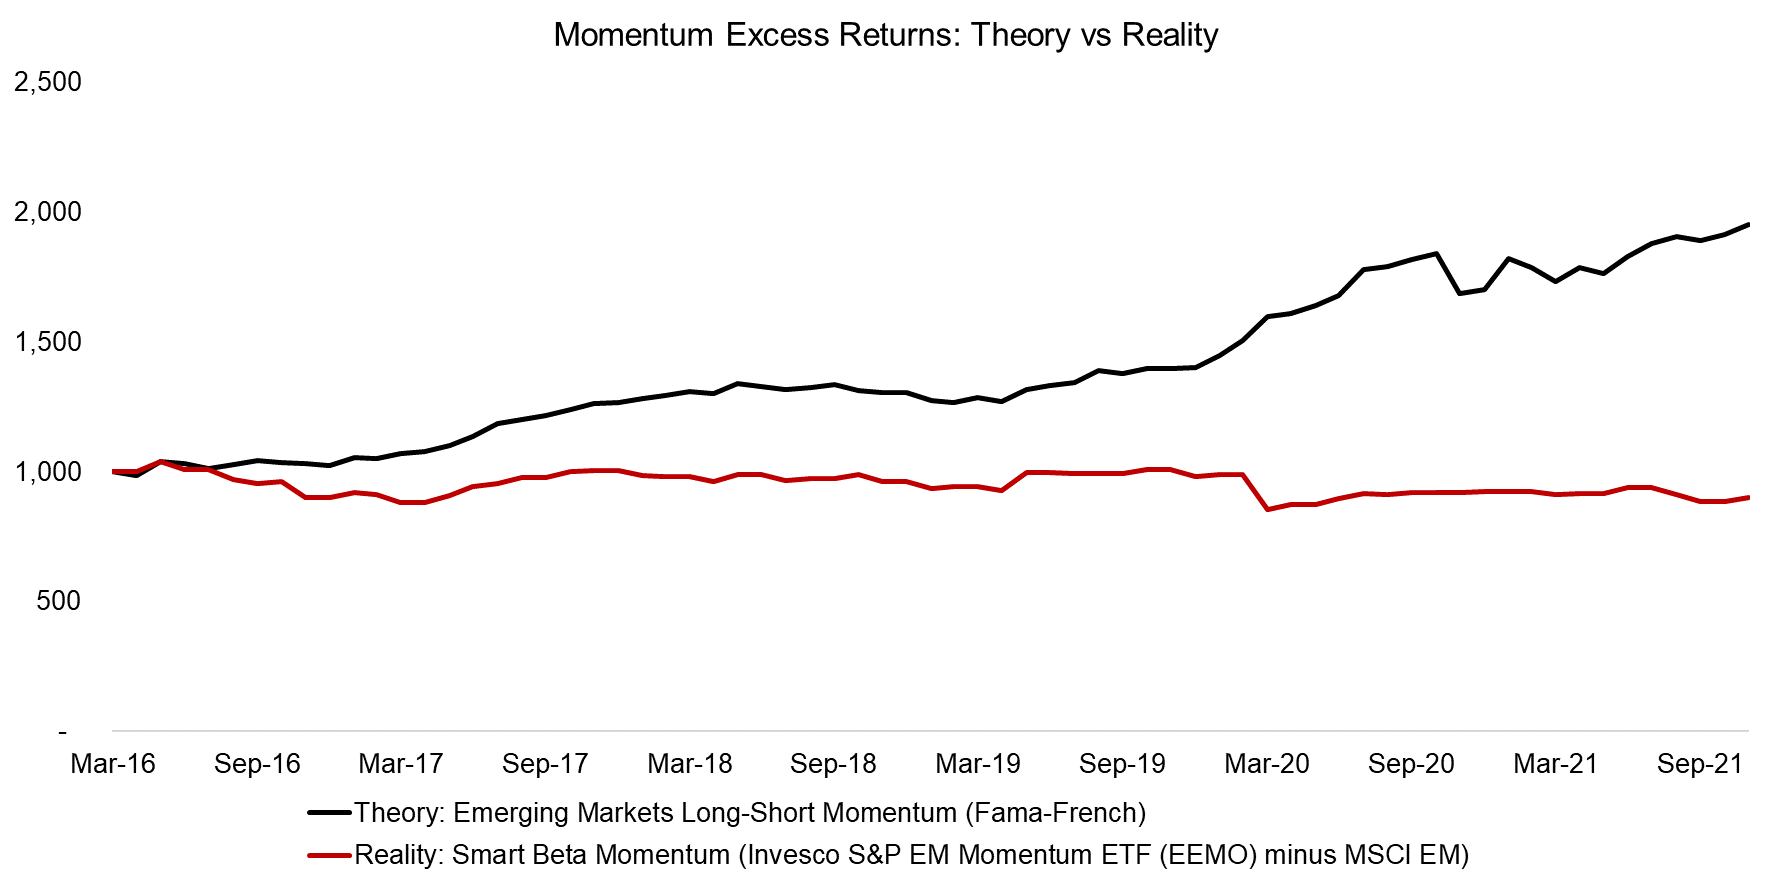 Emerging Markets Momentum Excess Returns Theory vs Reality